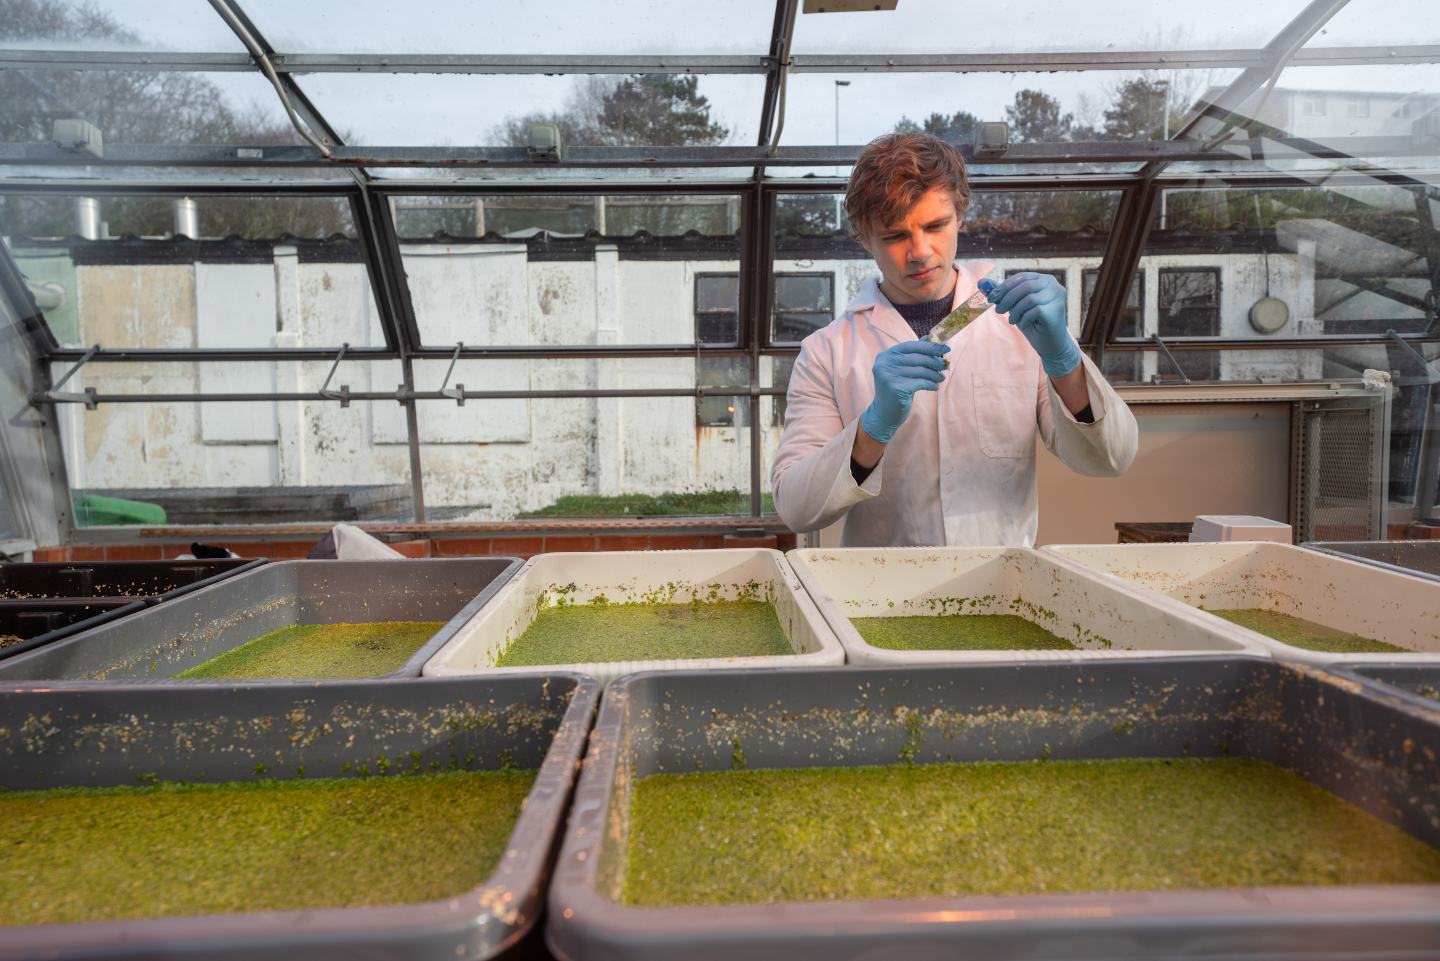 Scientists at Aberystwyth University are looking at how farm waste can be used to grow duckweed as a protein source for feeding livestock.